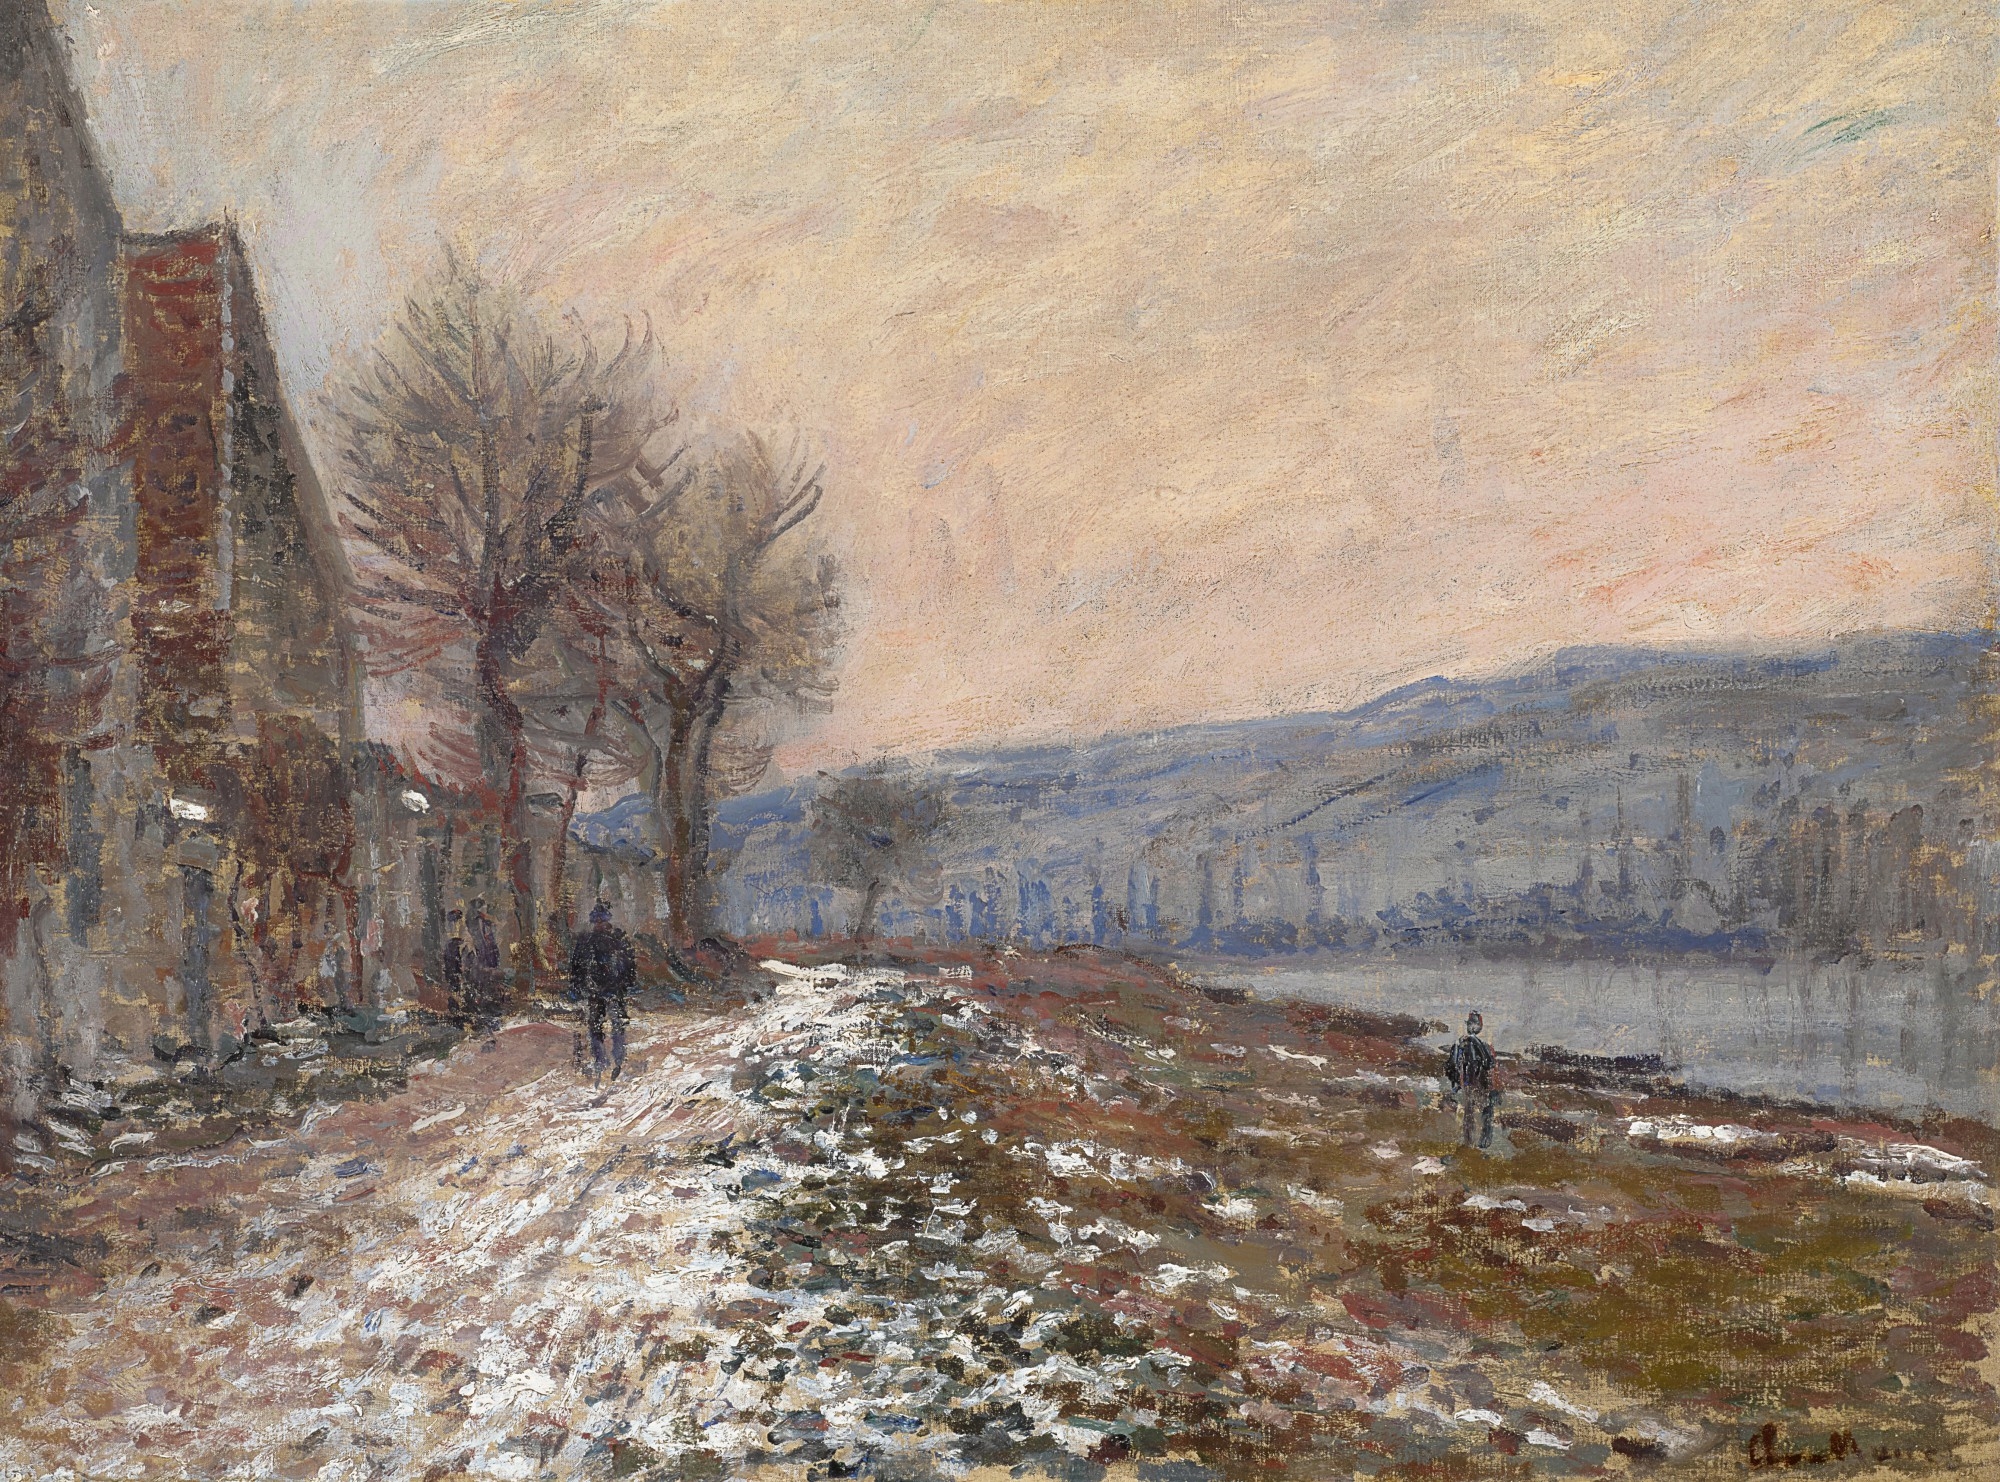 La Berge à Lavacourt, neige by Claude Monet, Executed in 1879